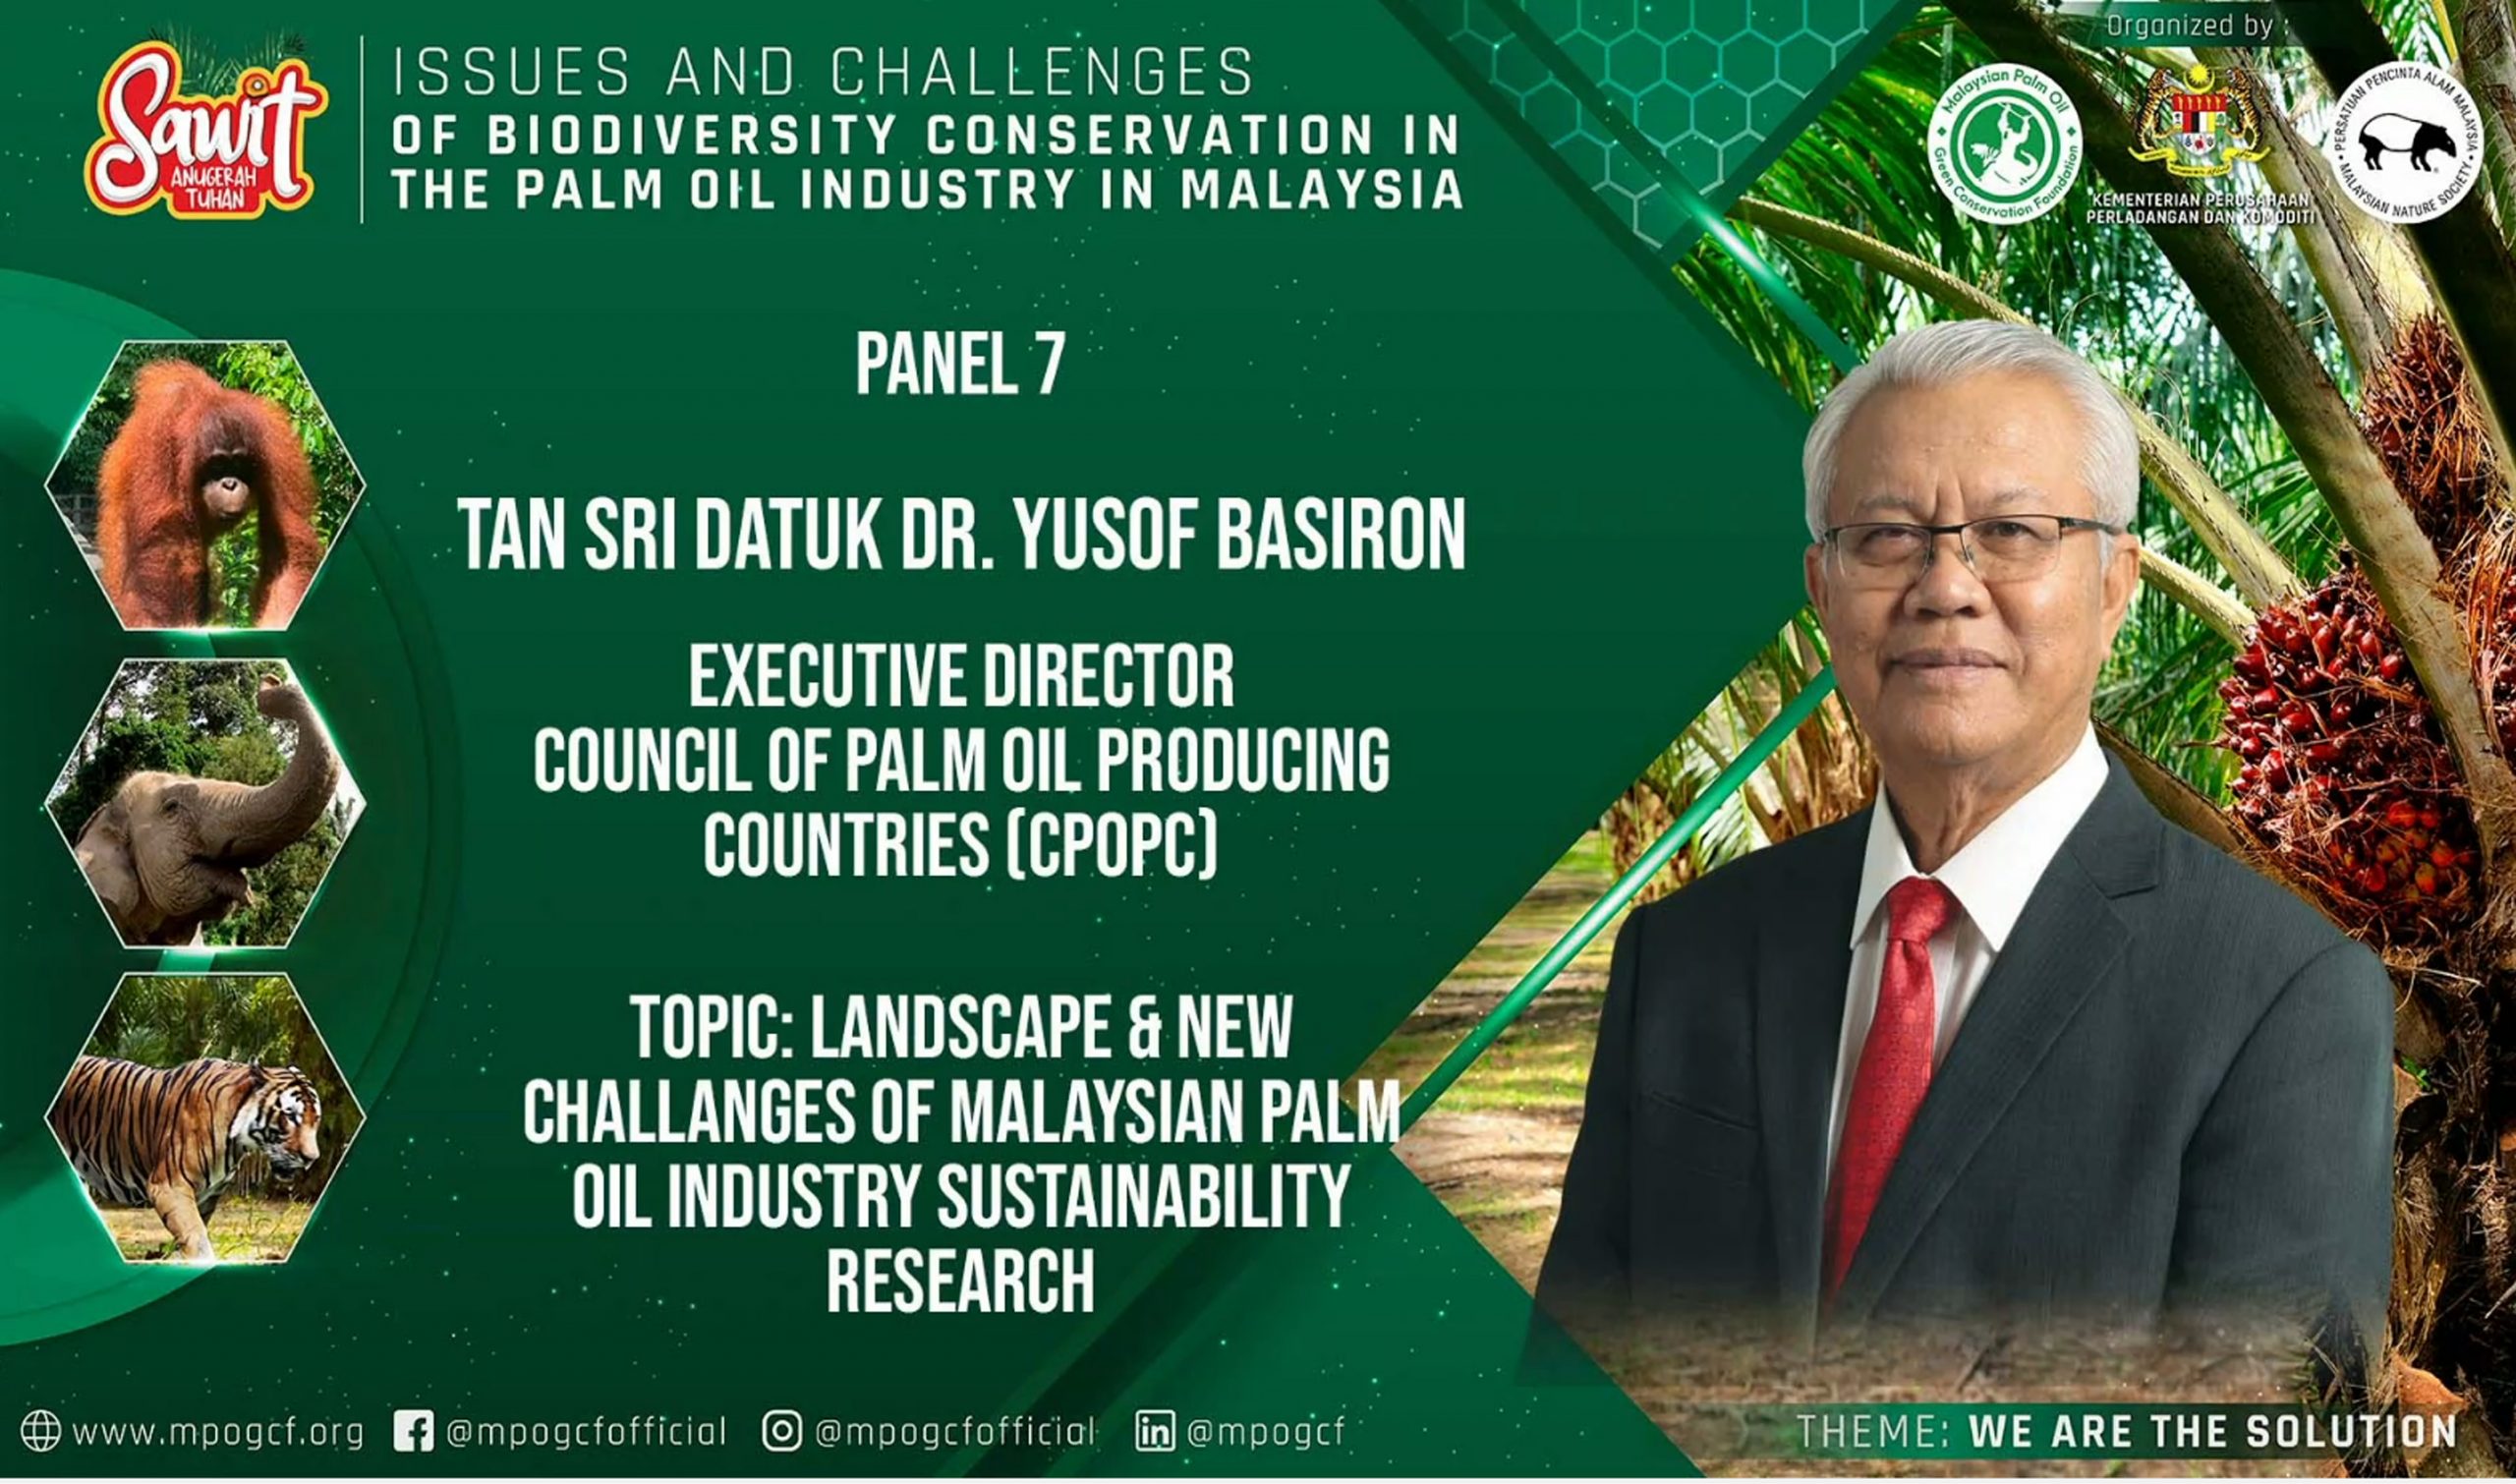 Landscapes and new challenges of Malaysian Palm Oil Industry Sustainability Research by Tan Sri Datuk Dr Yusof Basiron